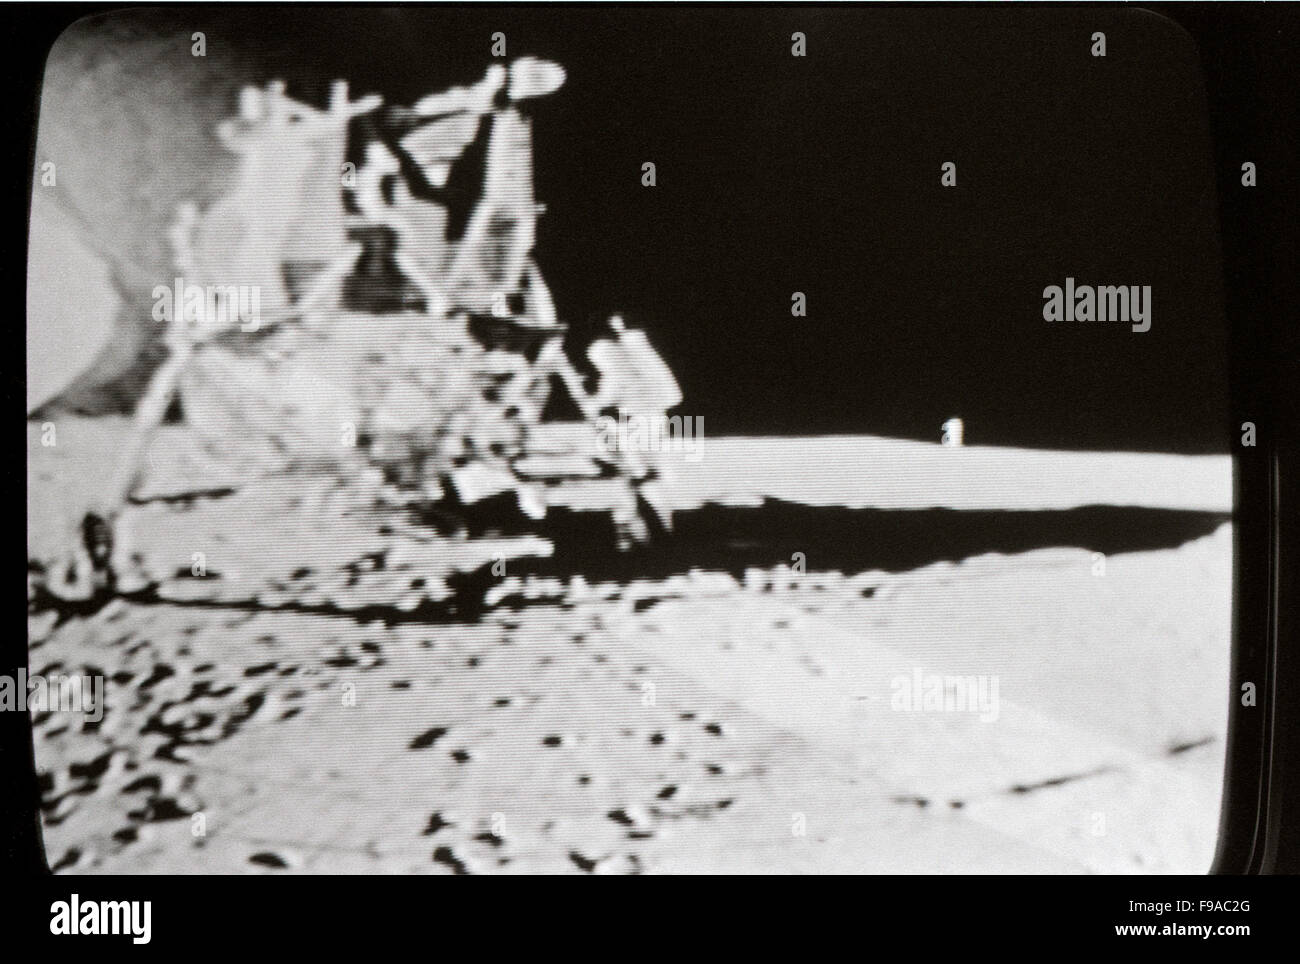 Apollo 11 moon landing module and astronaut 20 July 1969 photographed in actual time photographed on TV  television screen in Los Angeles, California KATHY DEWITT Stock Photo